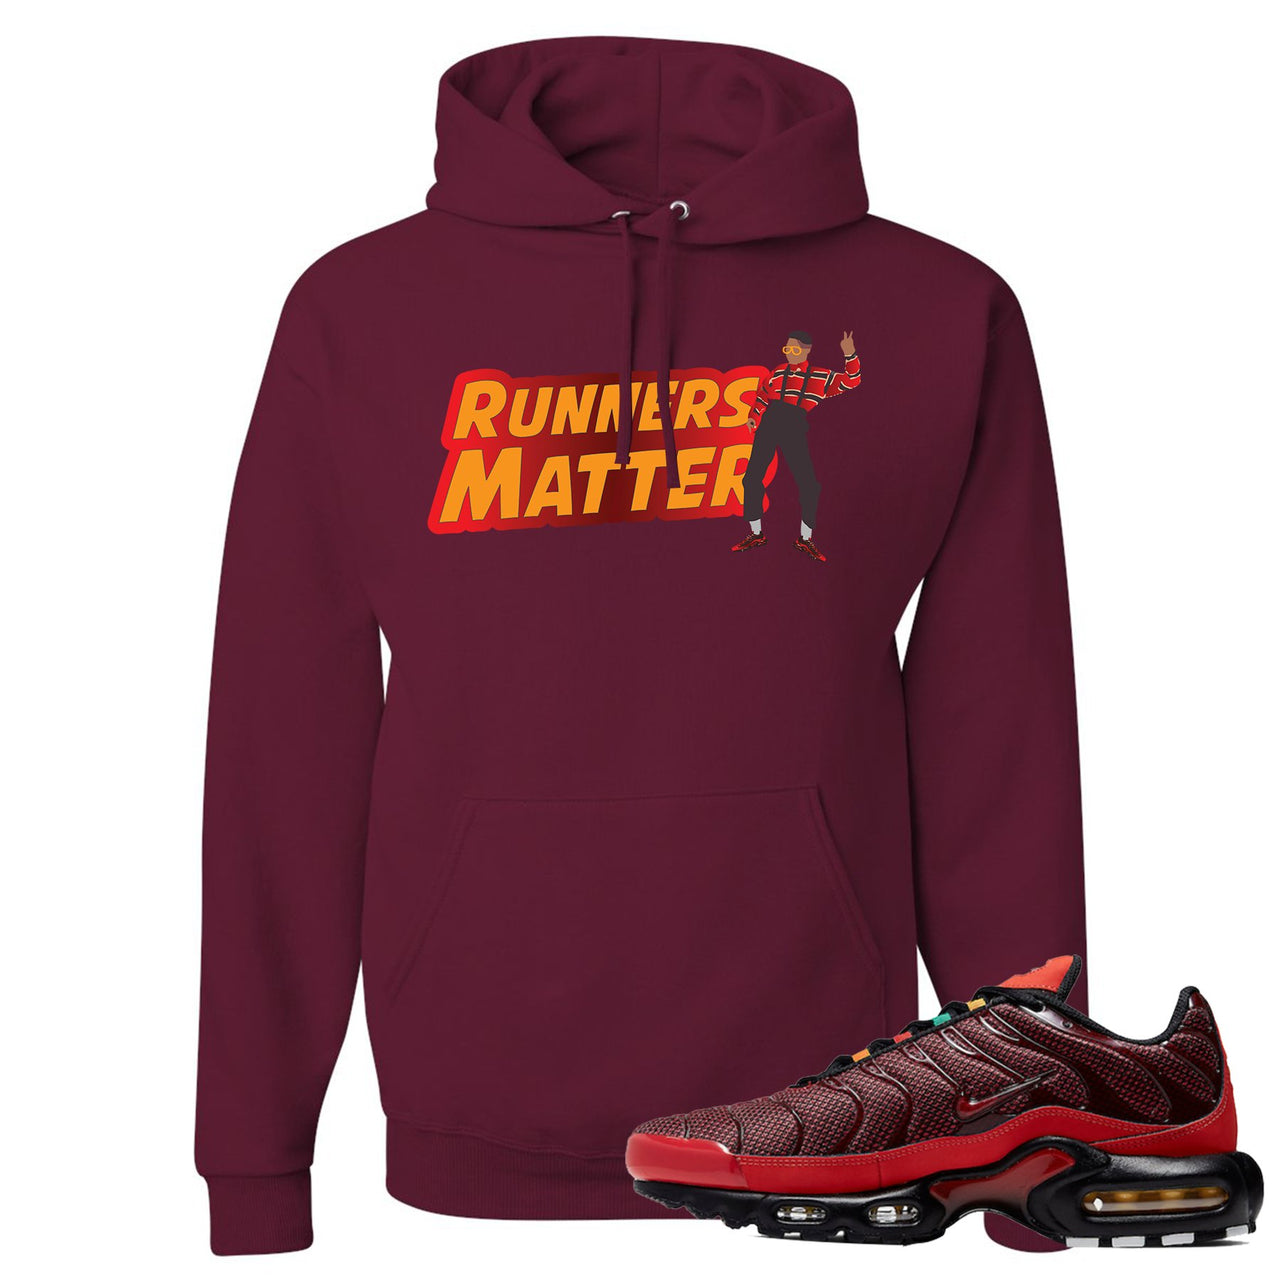 printed on the front of the air max plus sunburst sneaker matching maroon pullover hoodie is the runners matter logo